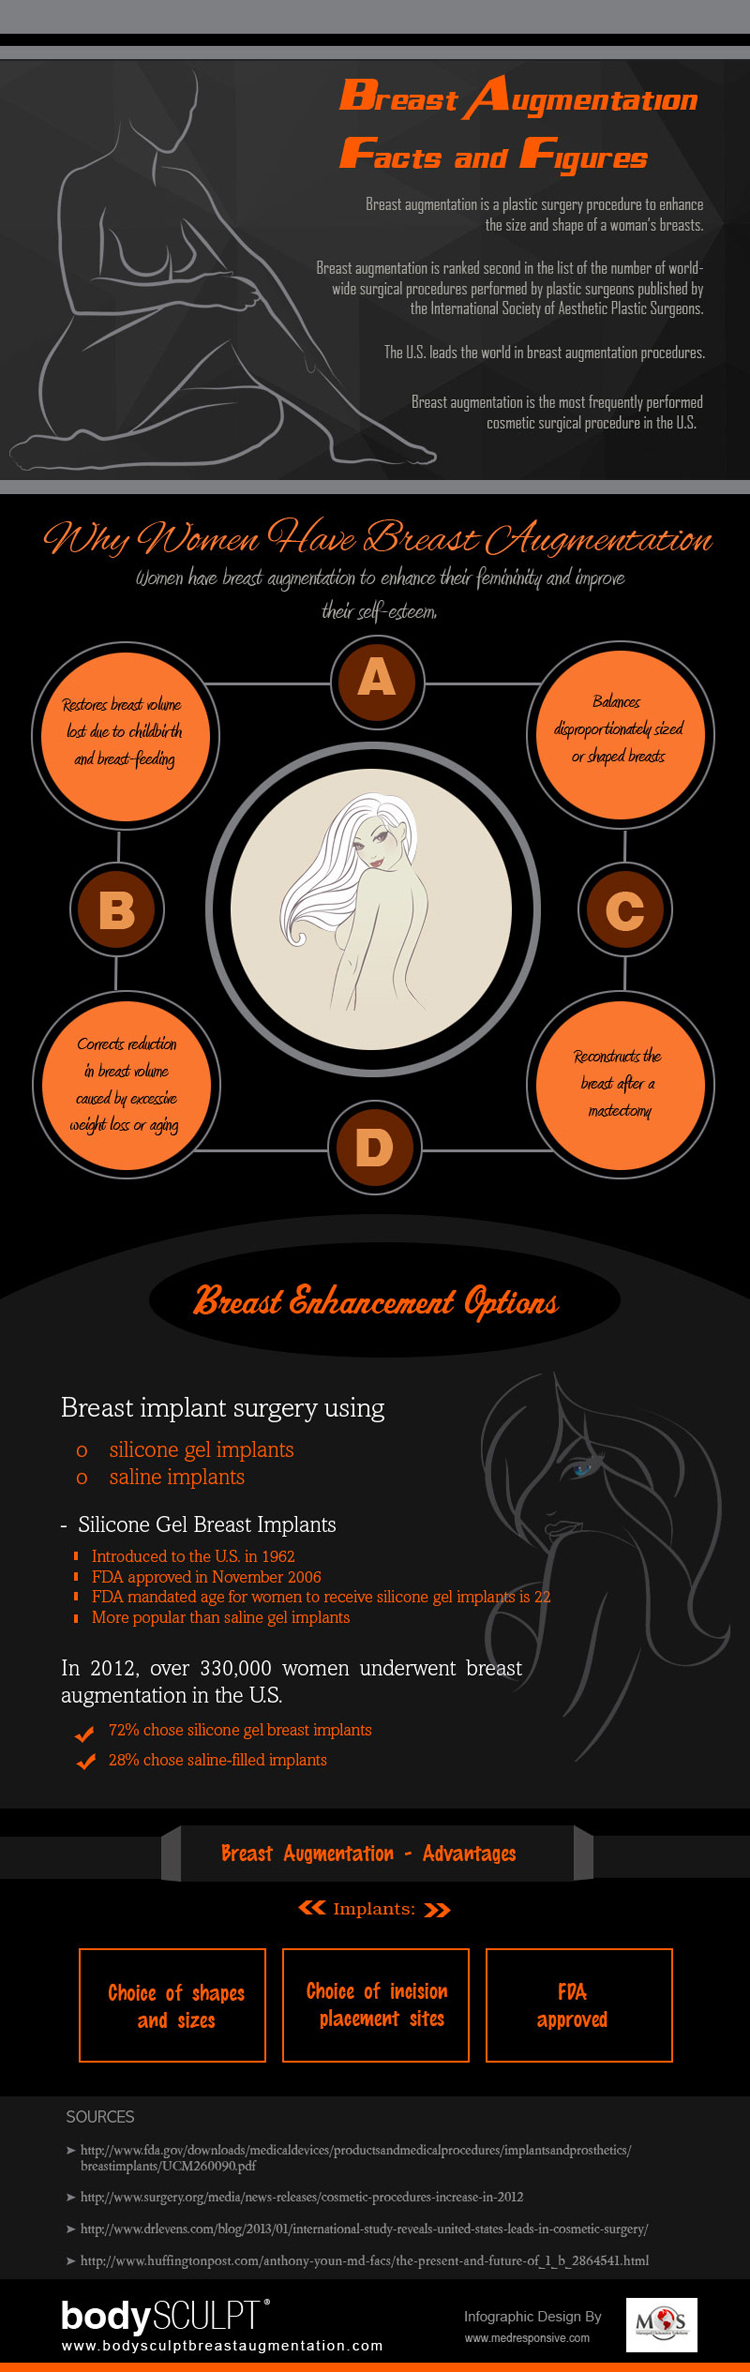 Breast Augmentation Facts and Figures